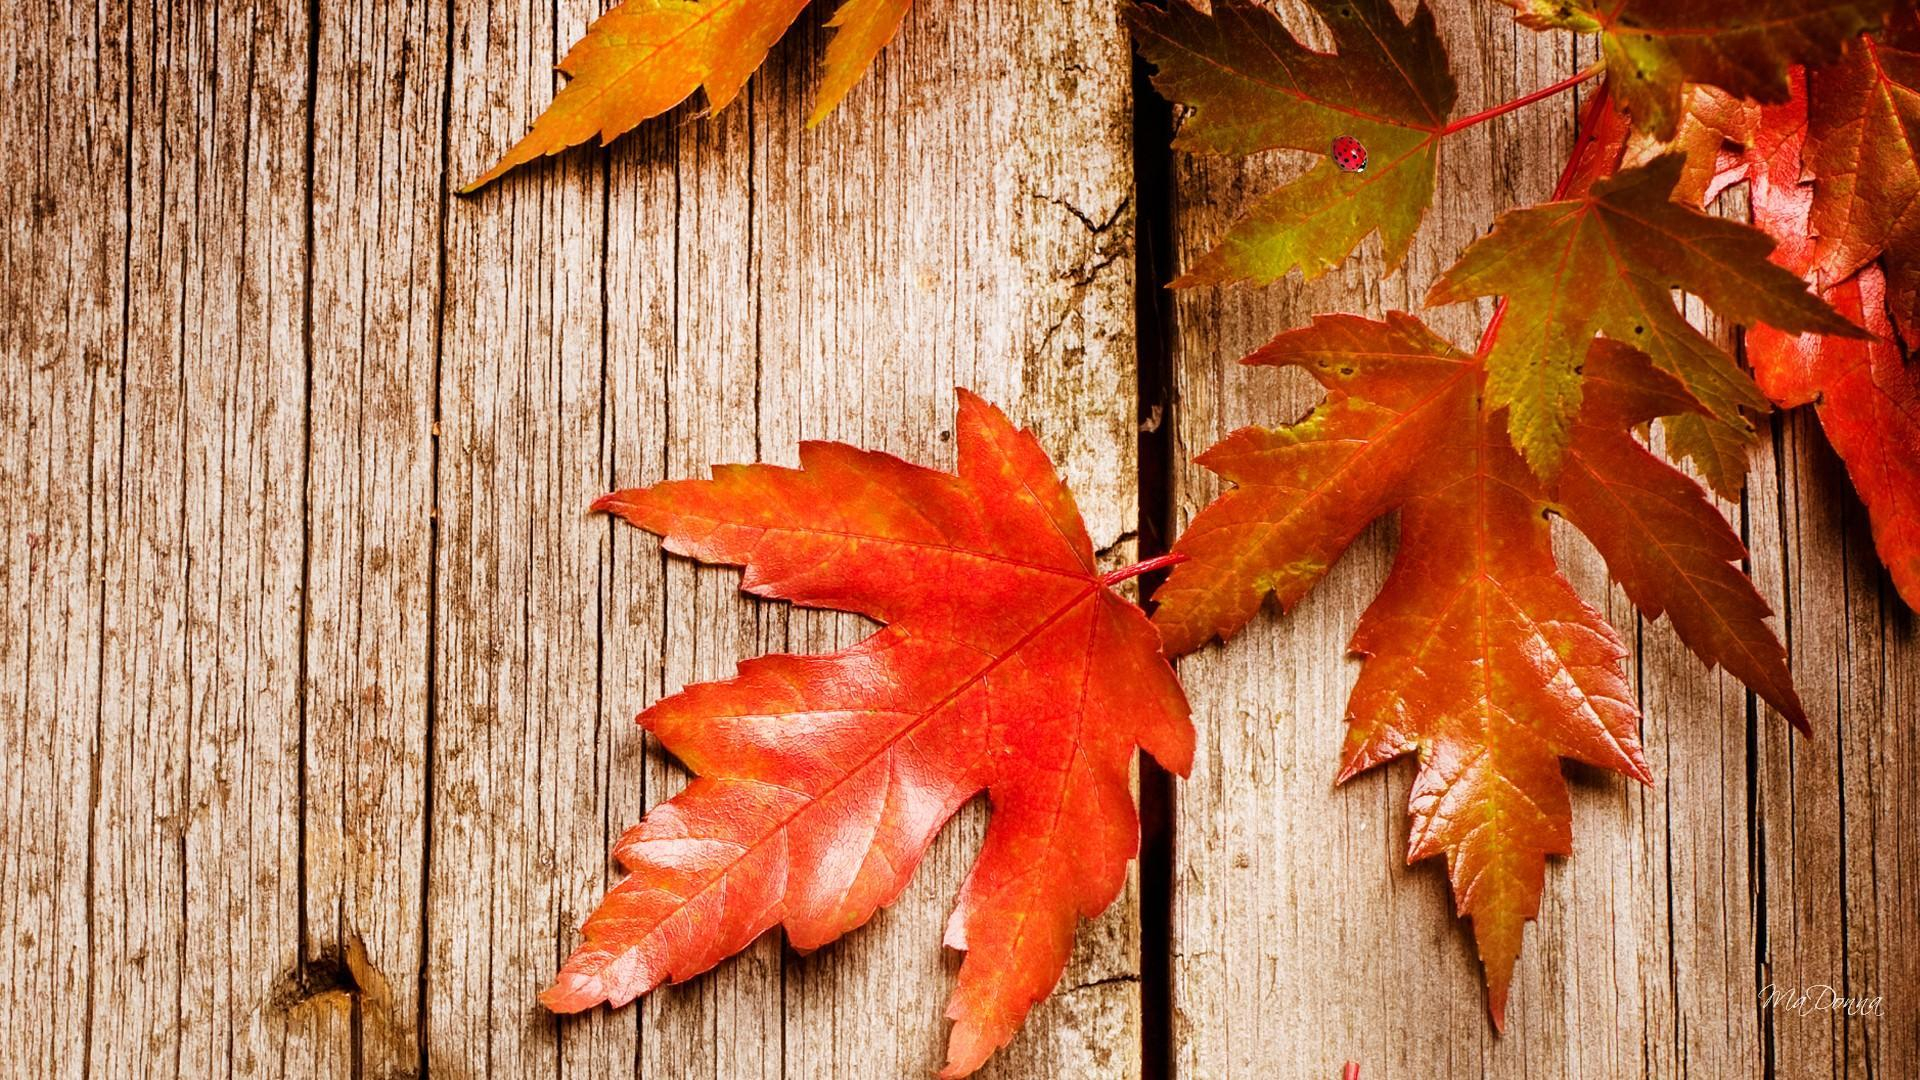 1920x1080 Autumn Rustic Wallpapers